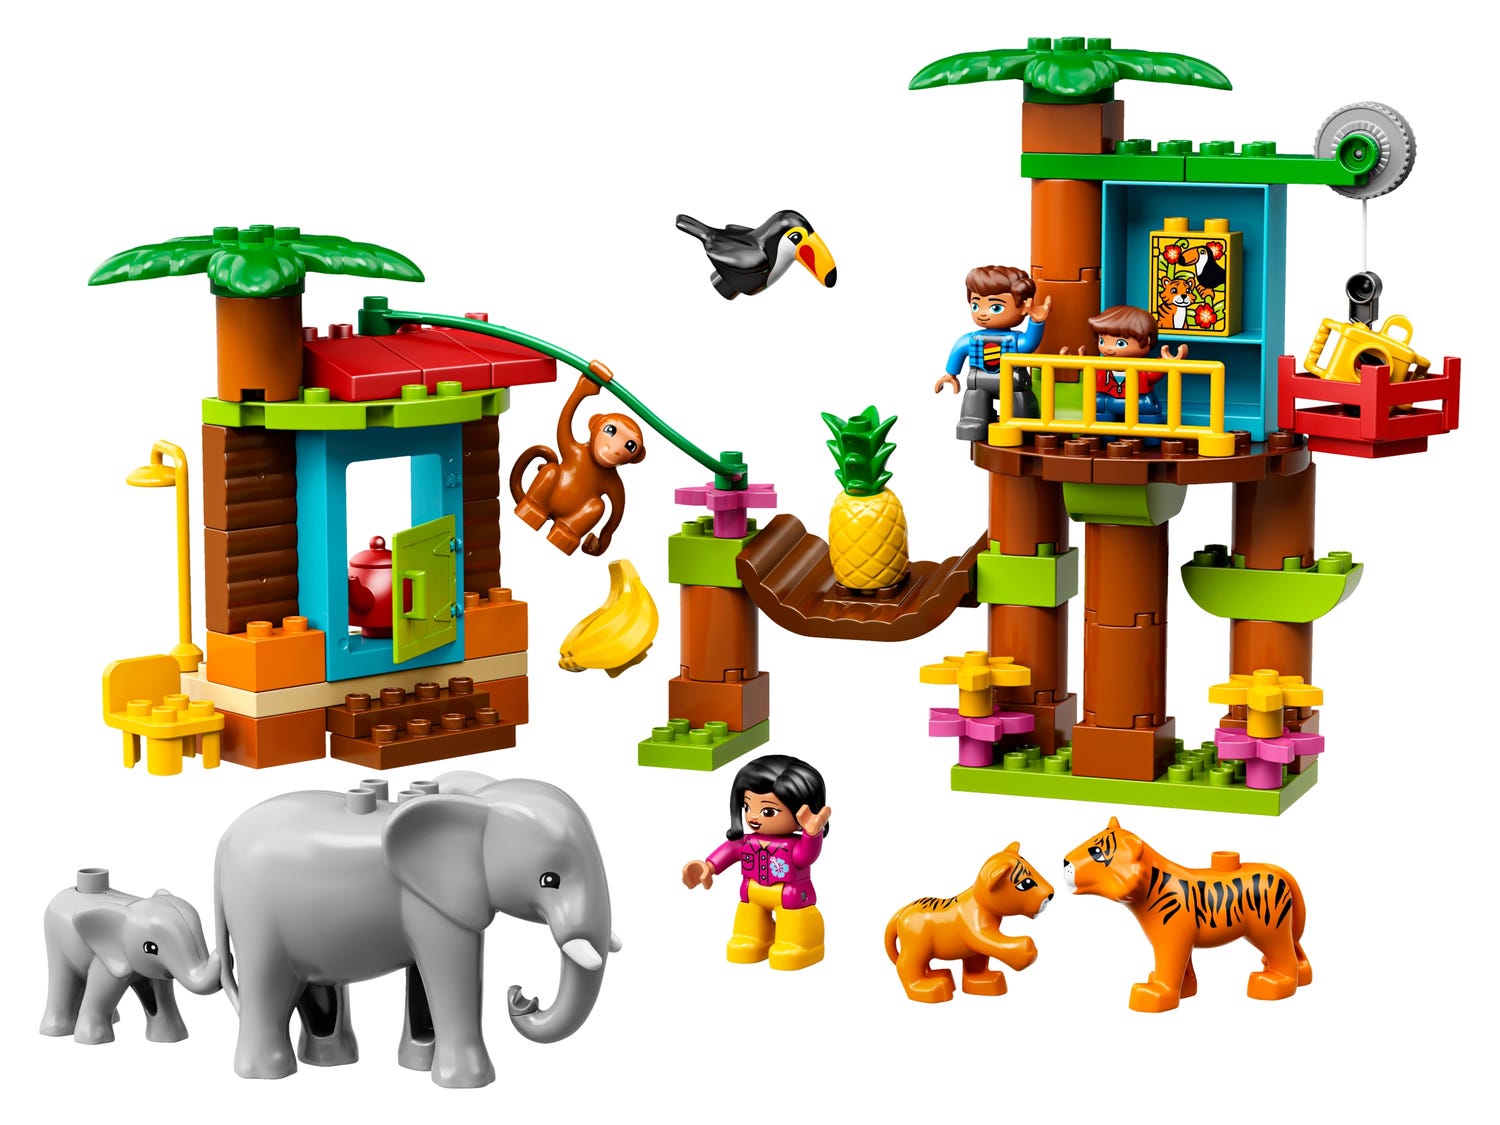 Tropical Island 10906 | DUPLO® | Buy online at the LEGO® Shop US